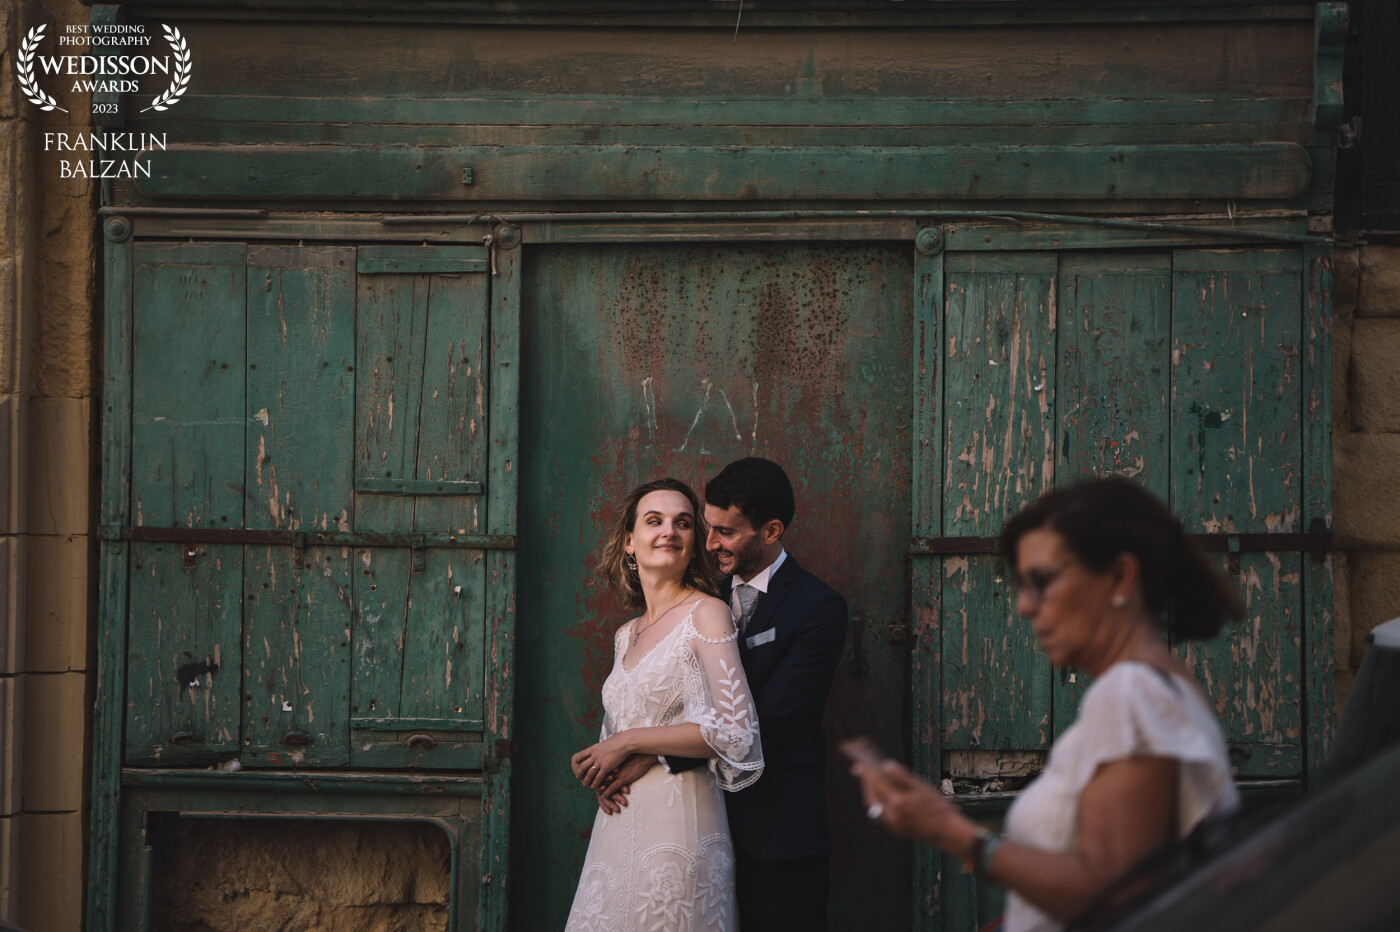 The wedding image is set against the backdrop of an old wooden green door in the heart of Valletta, Malta's capital city. The couple stands in front of the door, their bodies touching and in contact as they glance at each other.  A blur of motion in the foreground reveals a woman tourist passing by, adding a touch of local flavor and authenticity to the image.